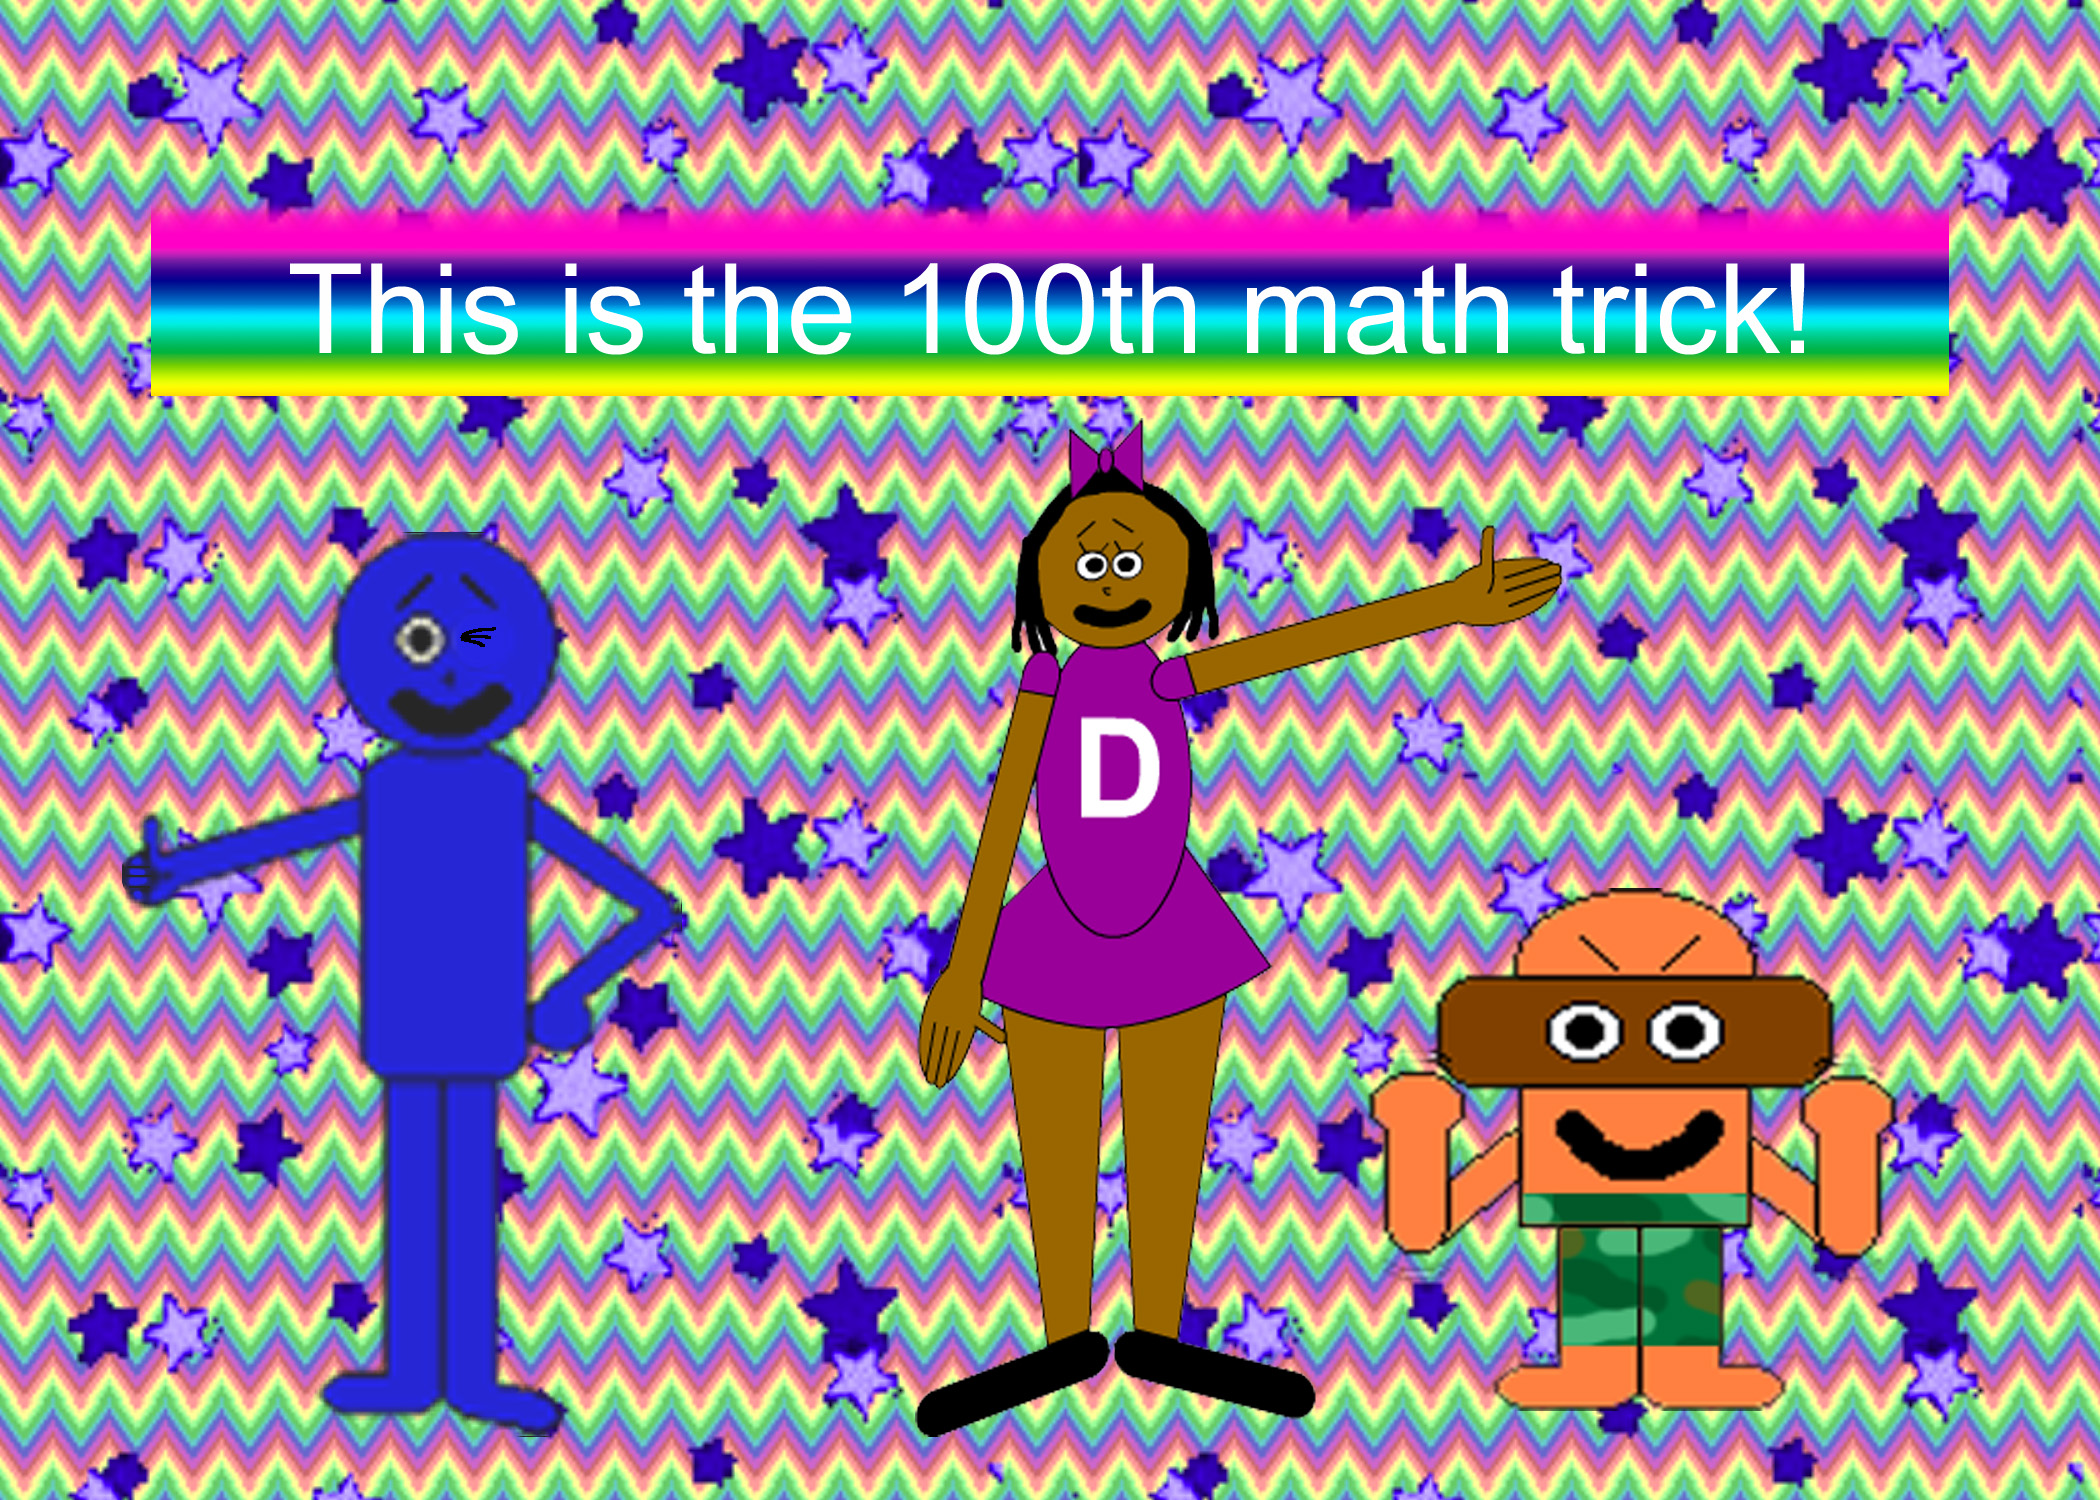 This is the 100th math trick!